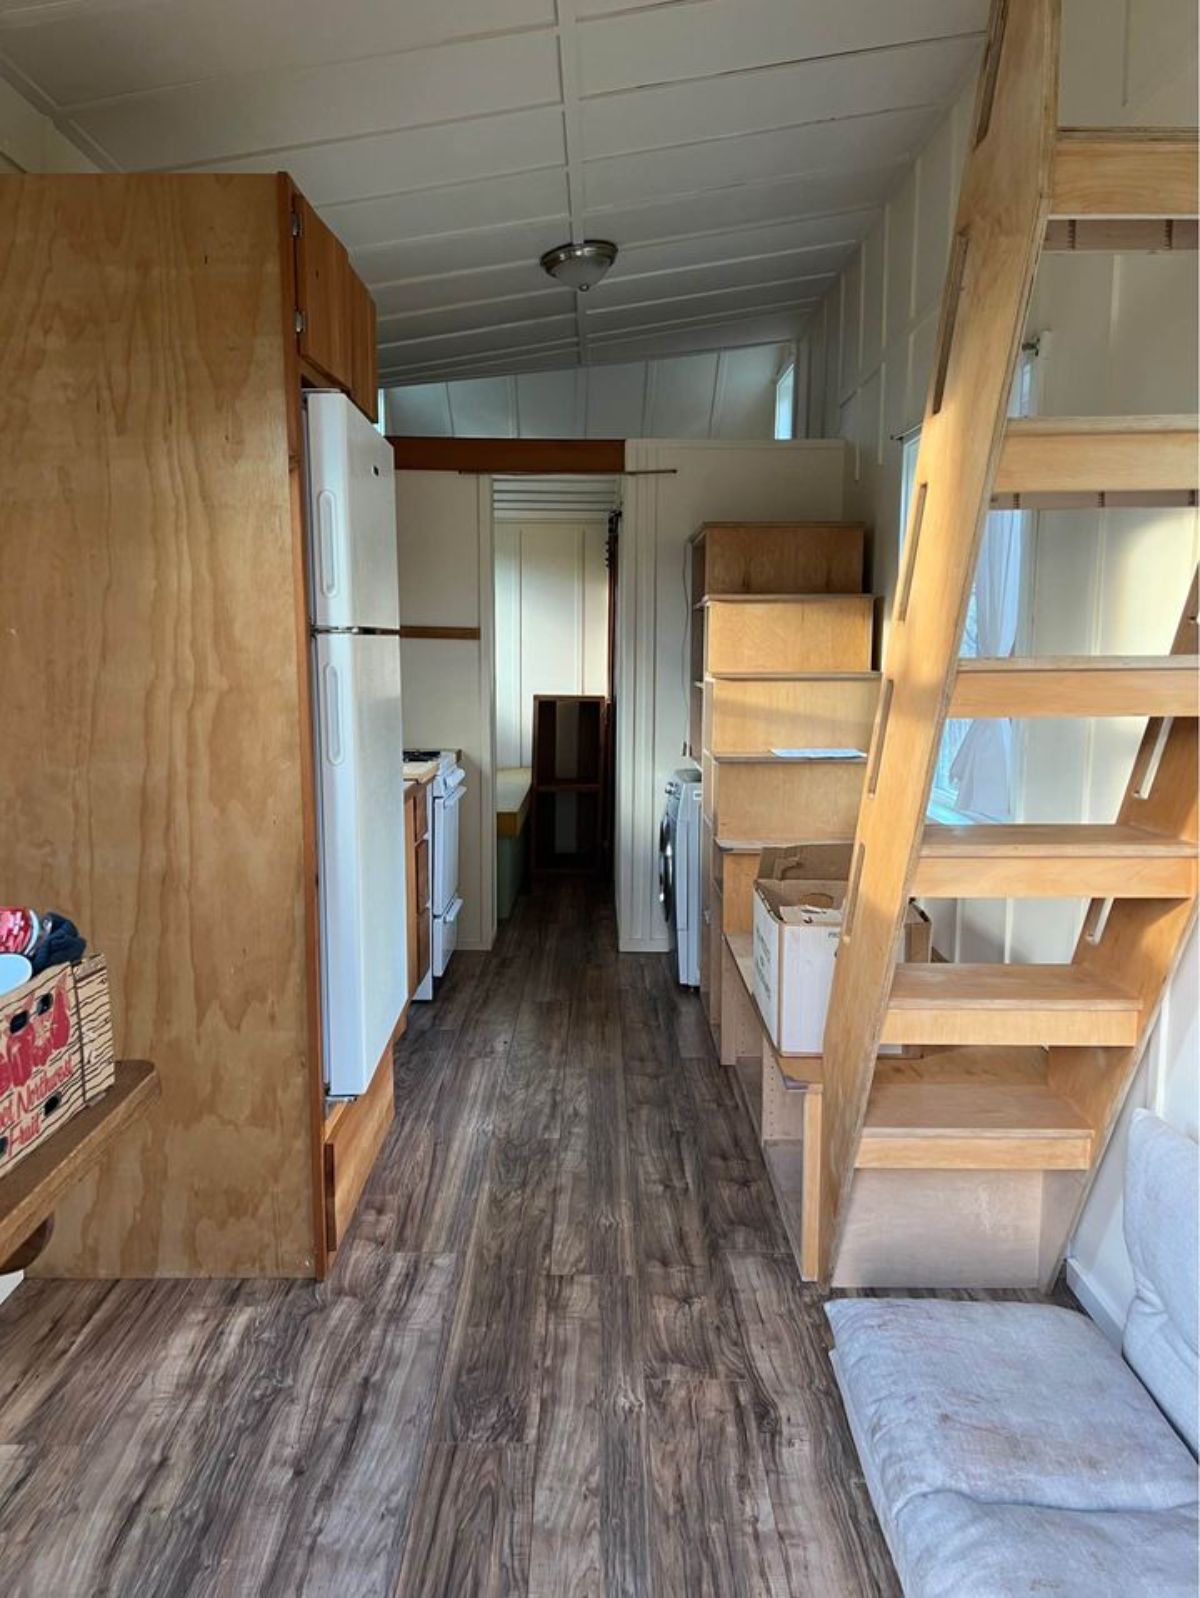 Full view of 26' Tiny Home from inside